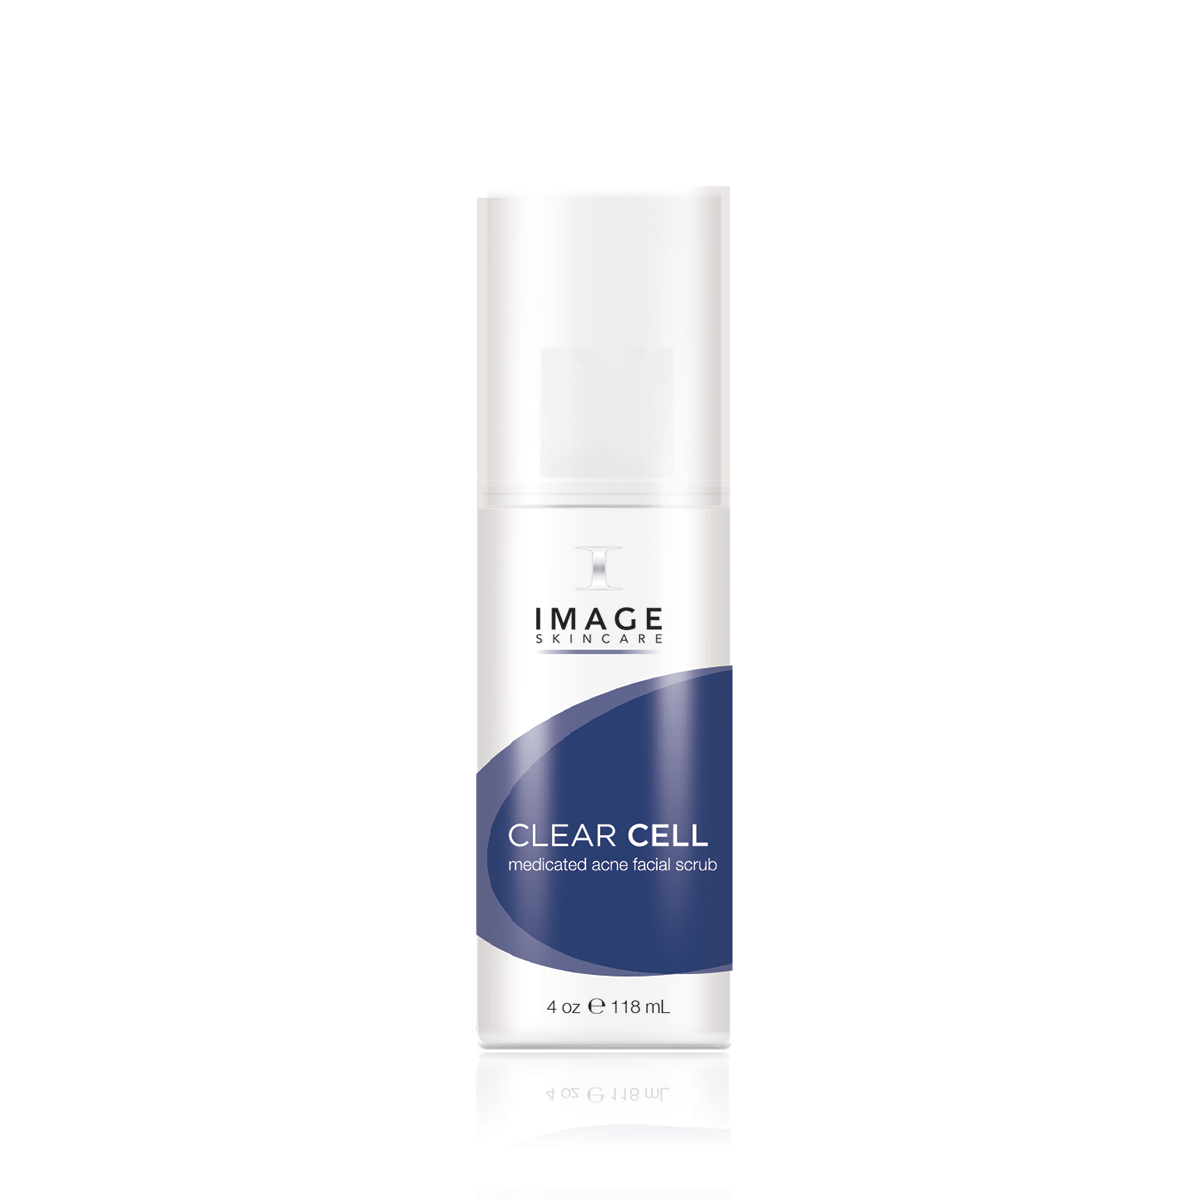 Image Skin Clear Cell лосьон. Clear Cell Salicylic Clarifying Tonic. Эмульсия анти акне image. Clear Cell Salicylic Gel Cleanser. Clear cell